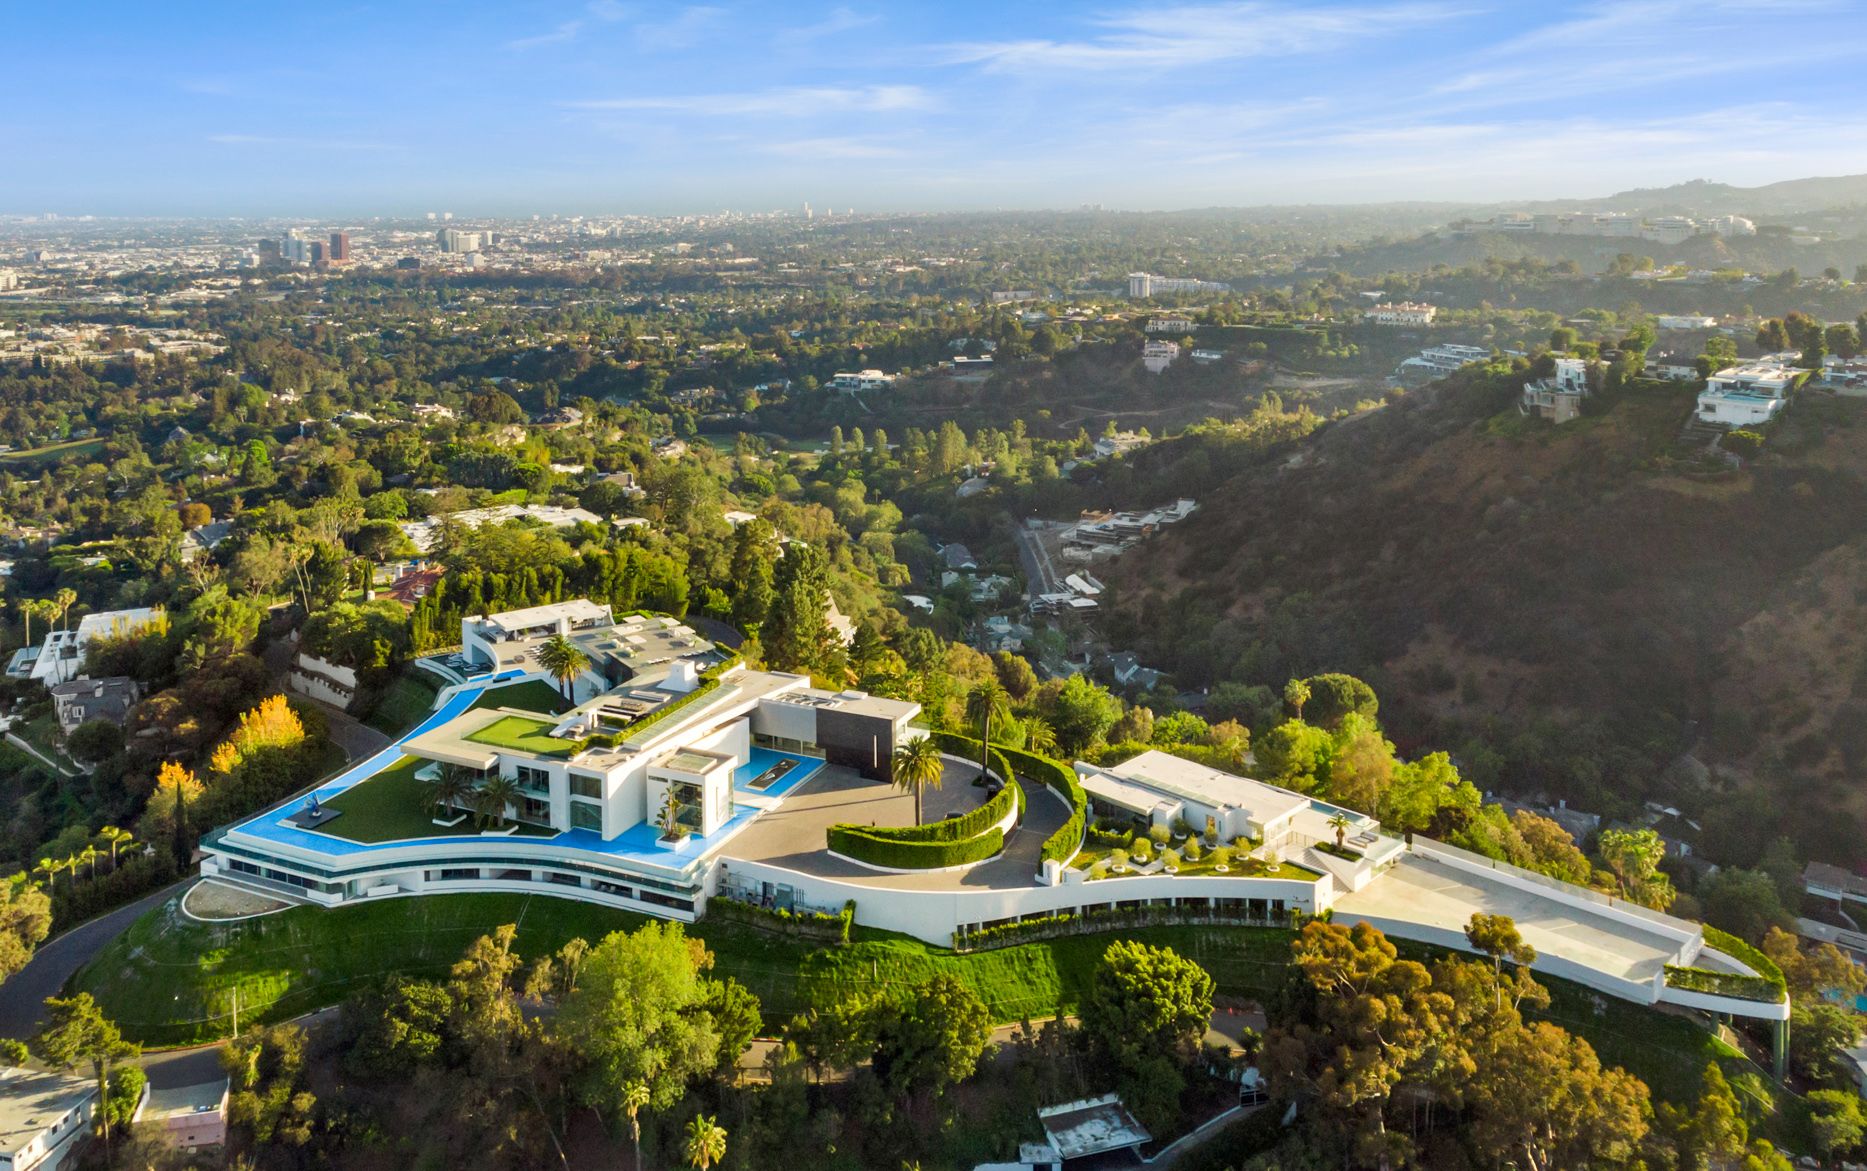 Look Inside This $250 Million Mega Mansion (And See Why It's So Expensive)